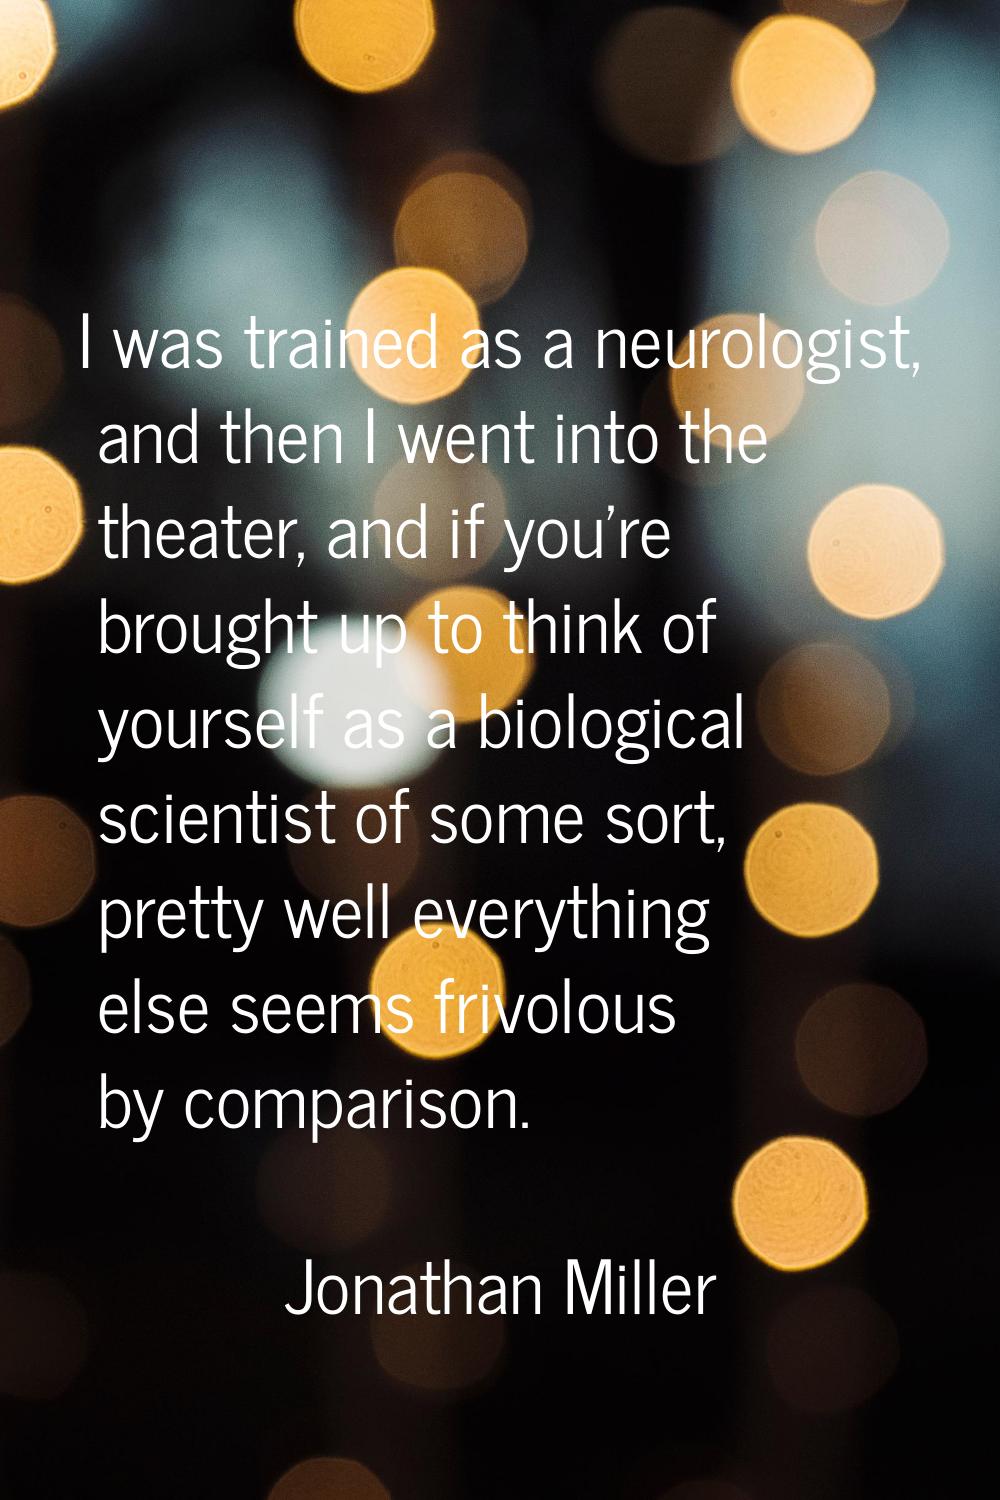 I was trained as a neurologist, and then I went into the theater, and if you're brought up to think